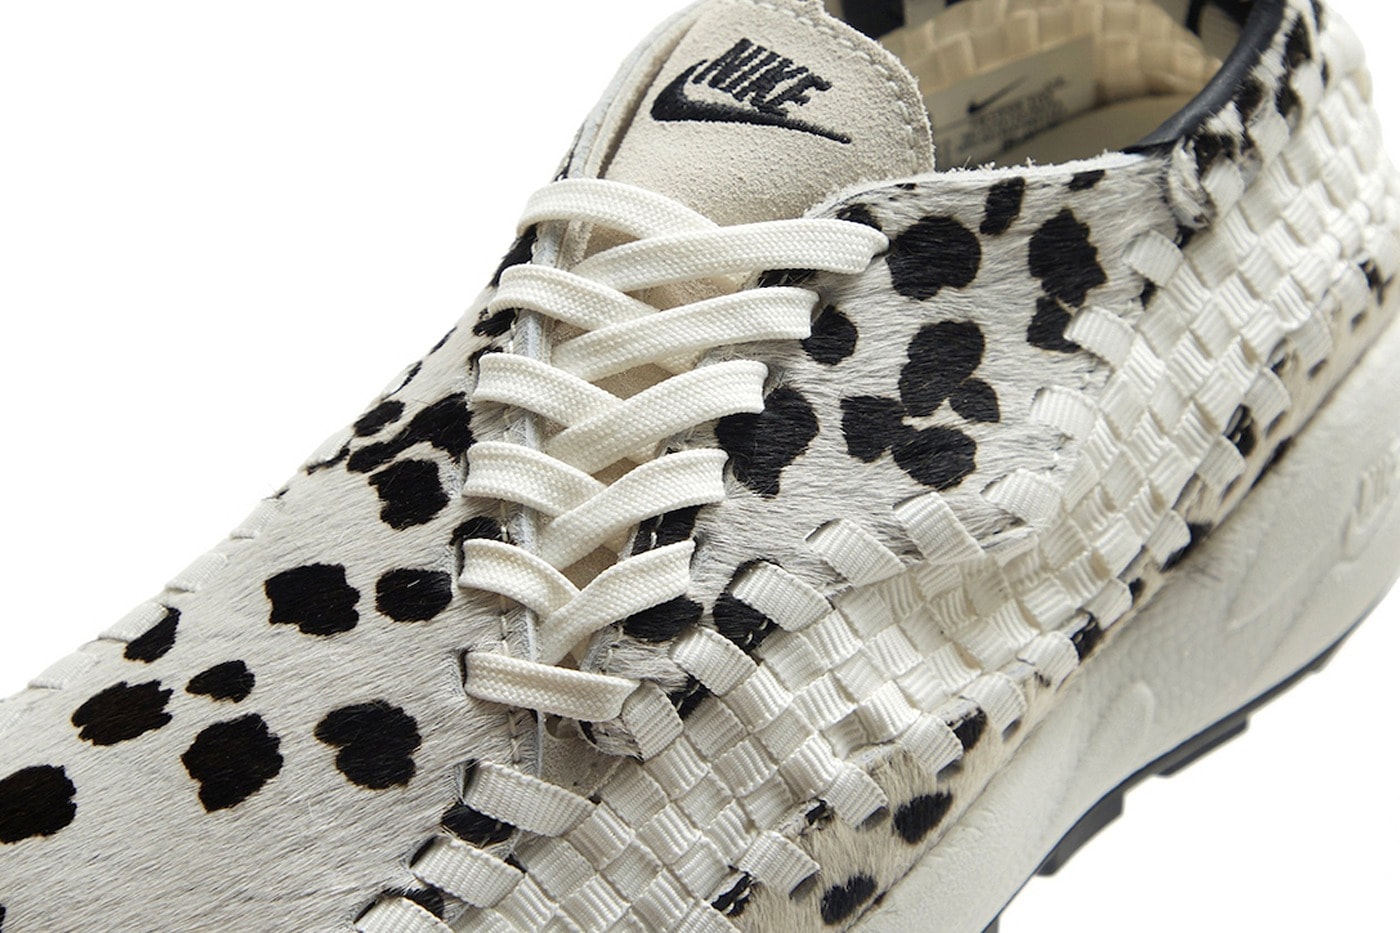 Nike Air Footscape Woven 最新配色「White Cow」推出